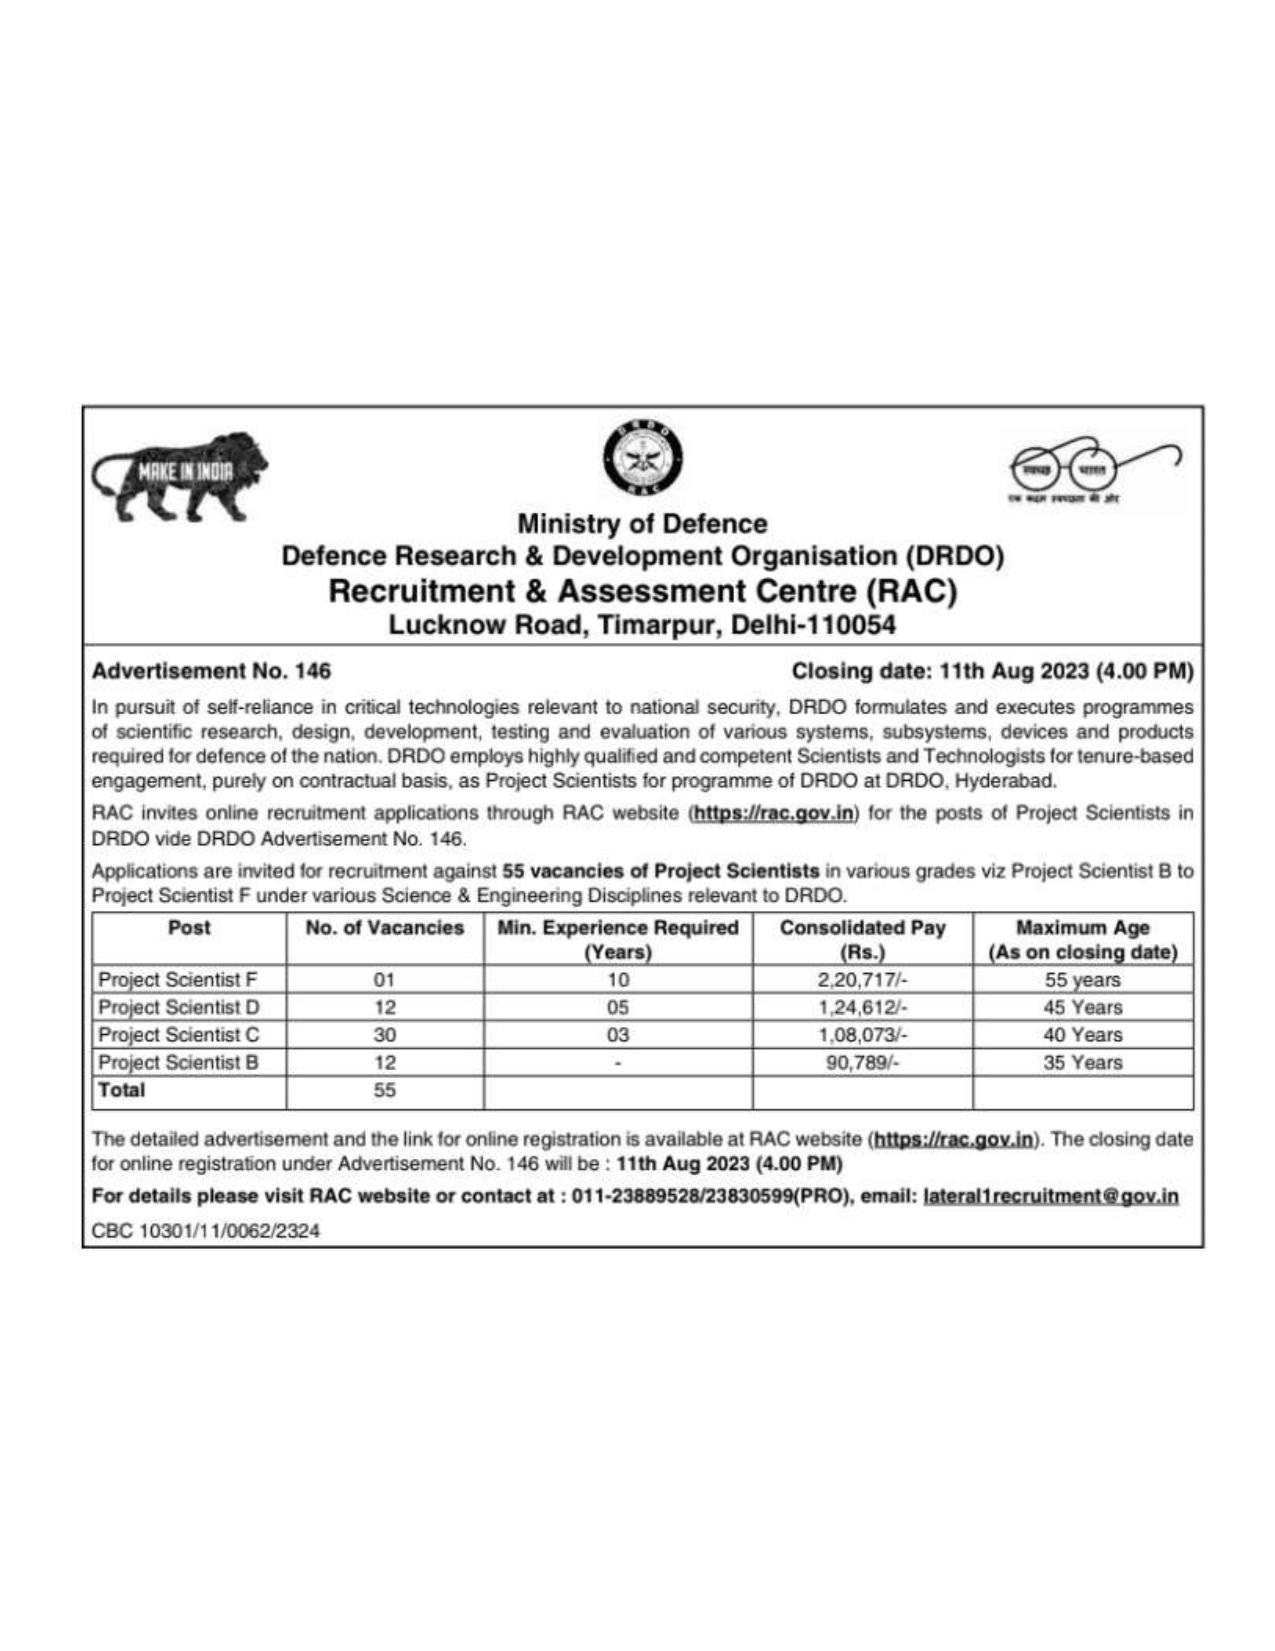 DRDO Recruitment and Assessment Centre (RAC) Project Scientist Recruitment 2023 - Page 1